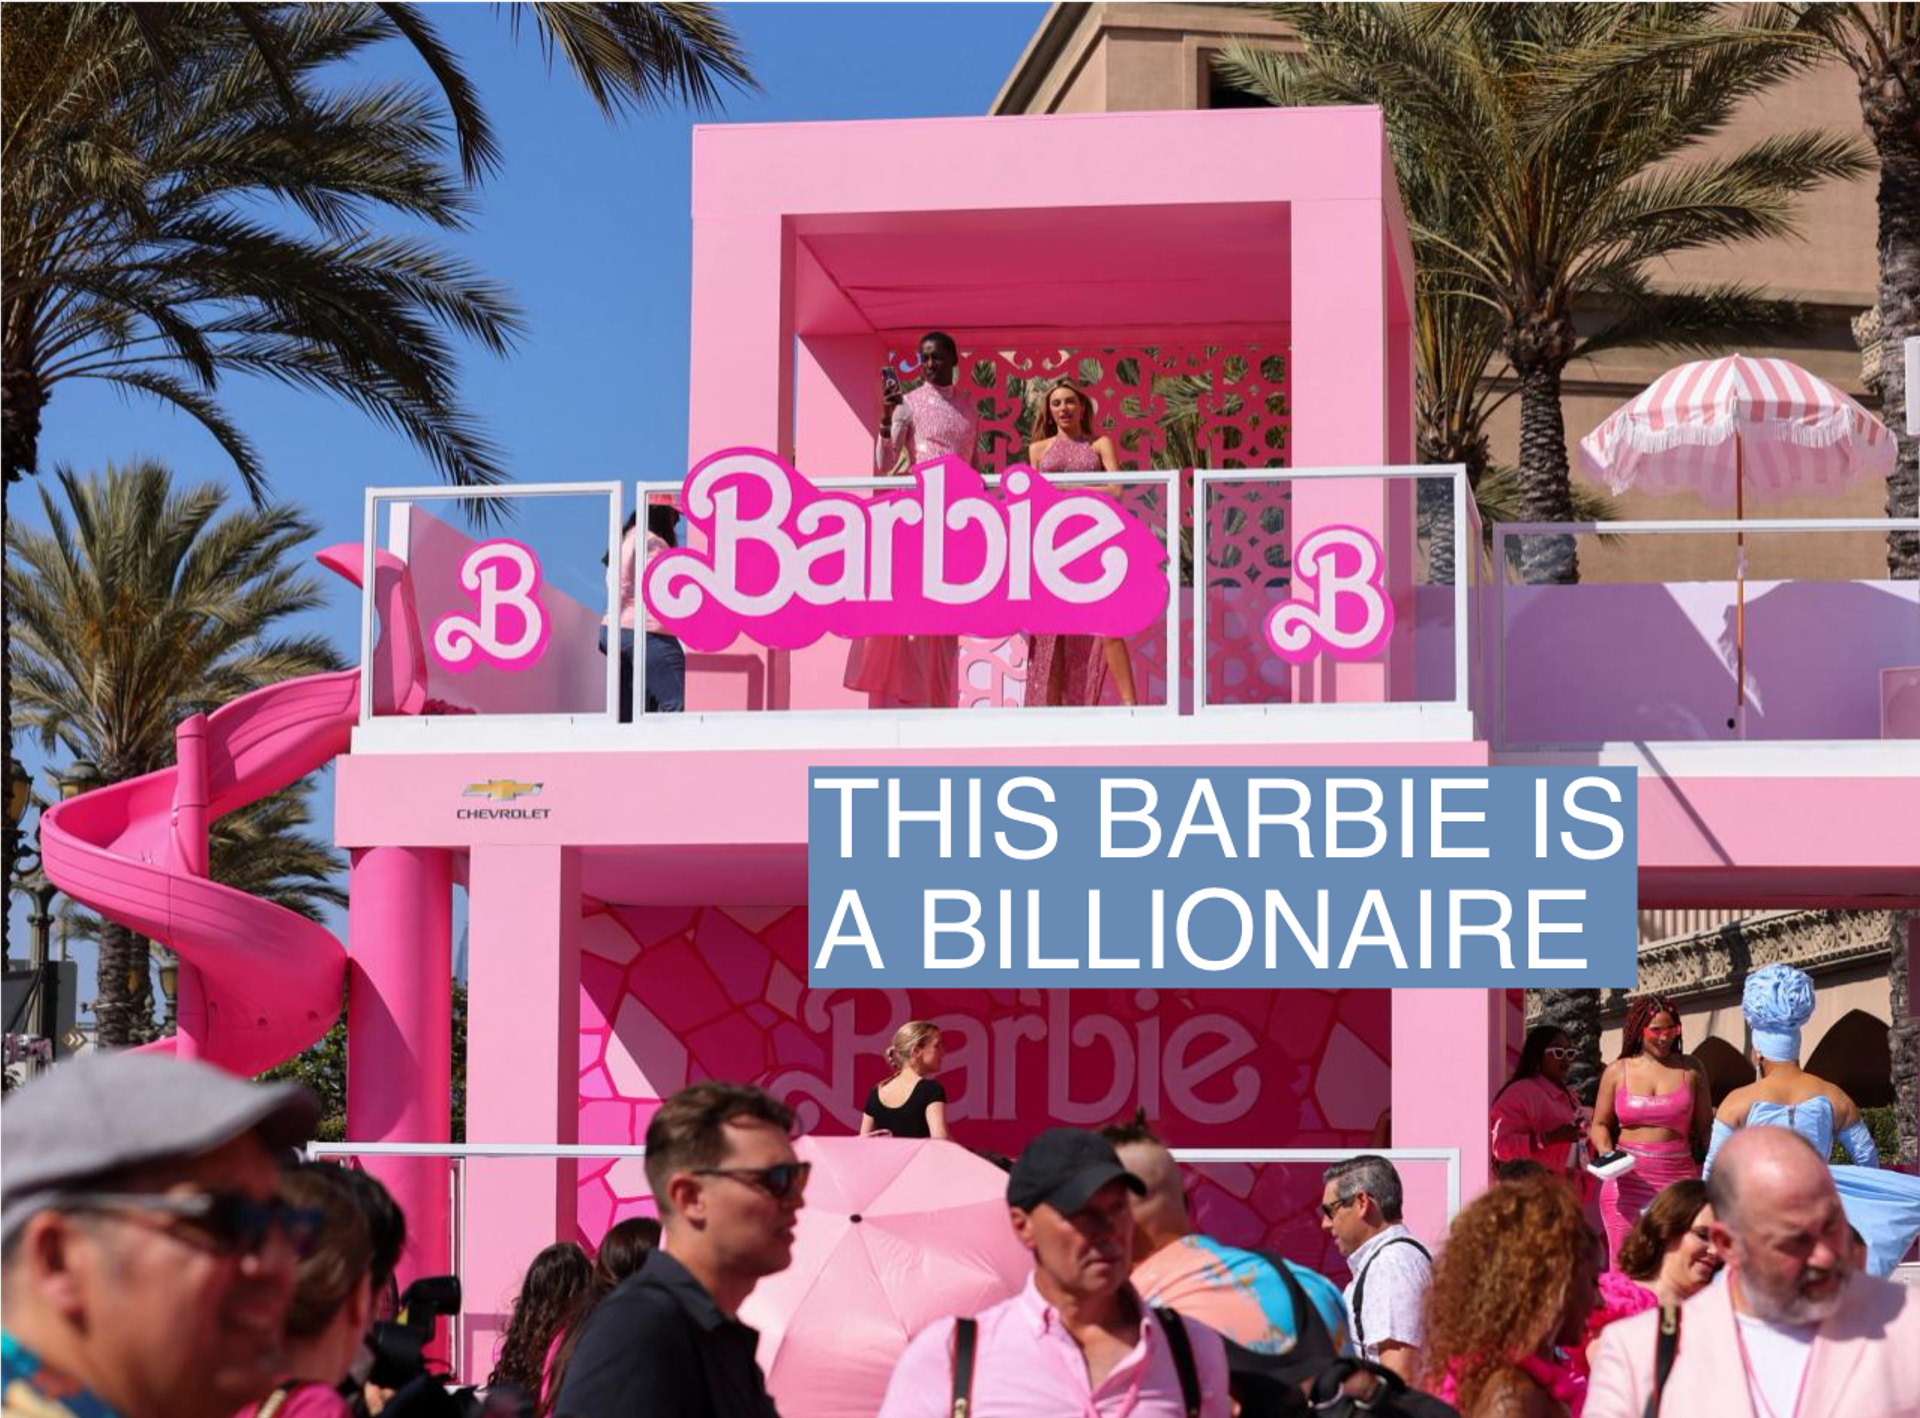 A general view of the world premiere of the film "Barbie" in Los Angeles, California, U.S., July 9, 2023. REUTERS/Mike Blake